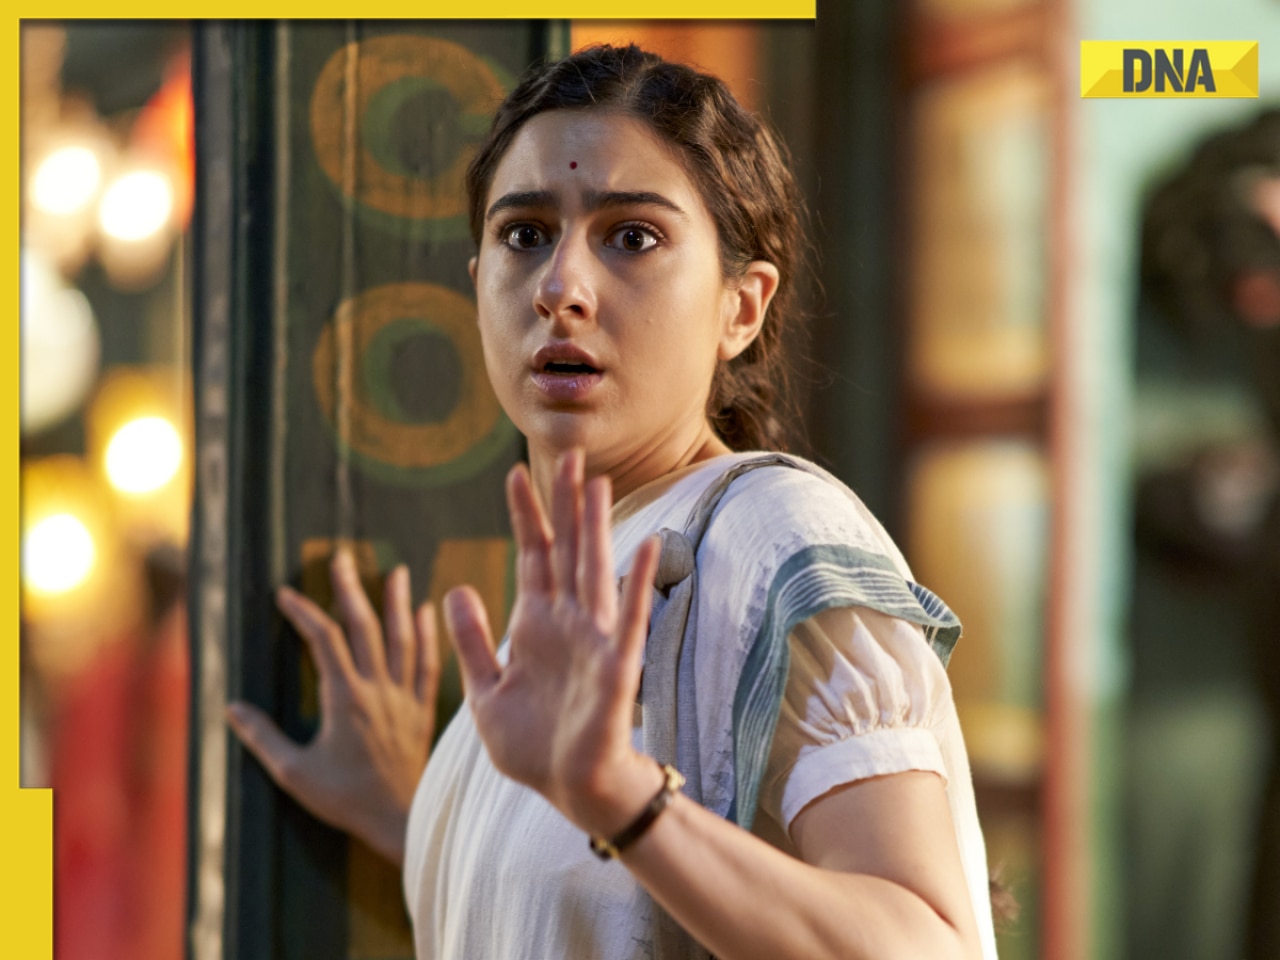 Ae Watan Mere Watan review: Sara Ali Khan, Kannan Iyer compete to bore the audience to sleep; we end up as the losers